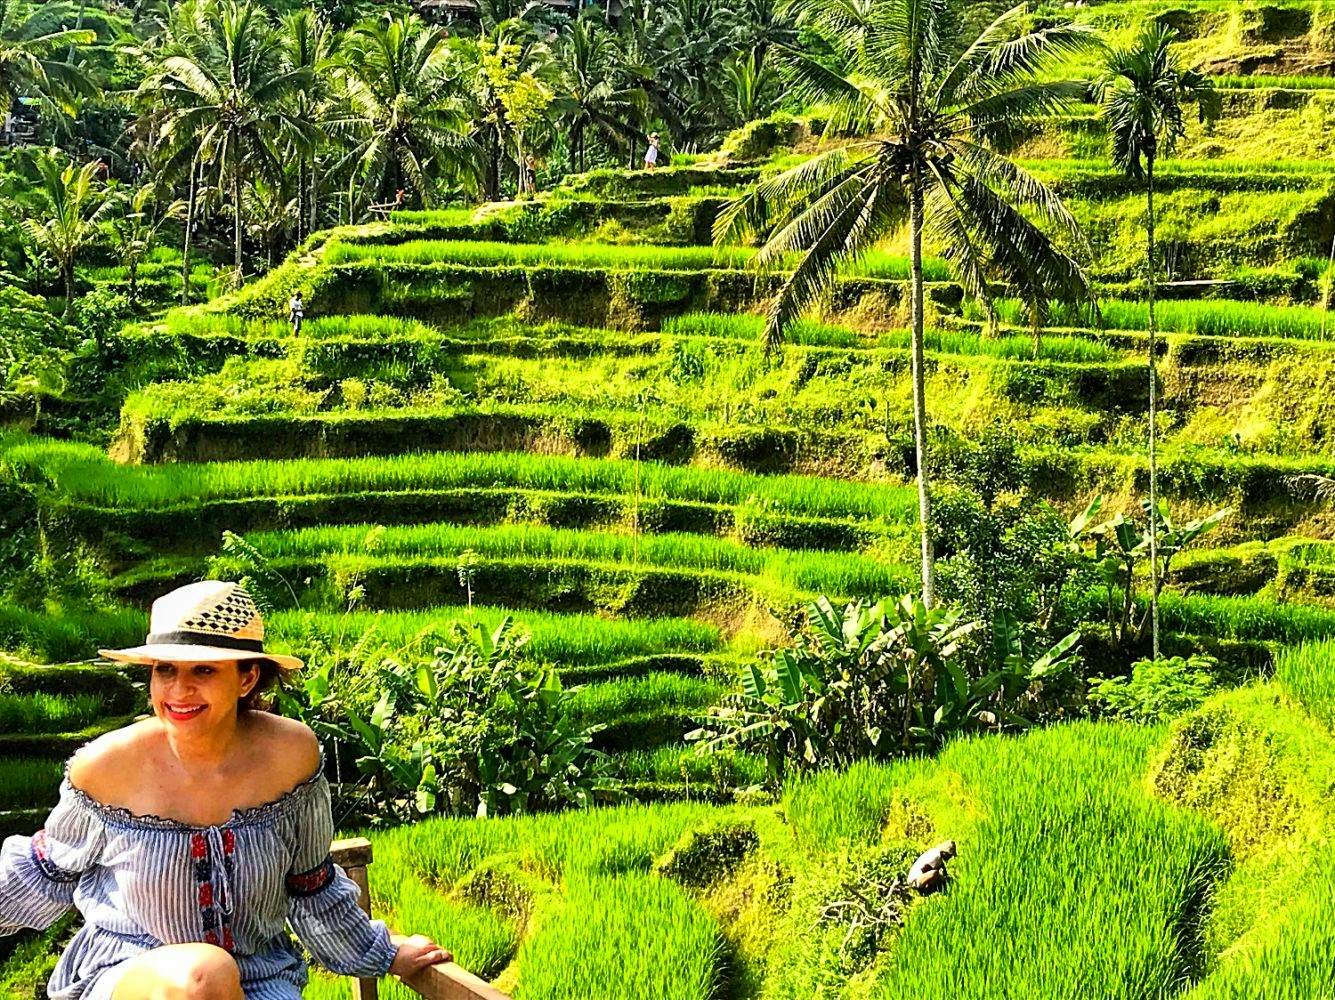 Kintamani Volcano +  Tegallalang Rice Terraces + Ubud monkey forest with private transfers